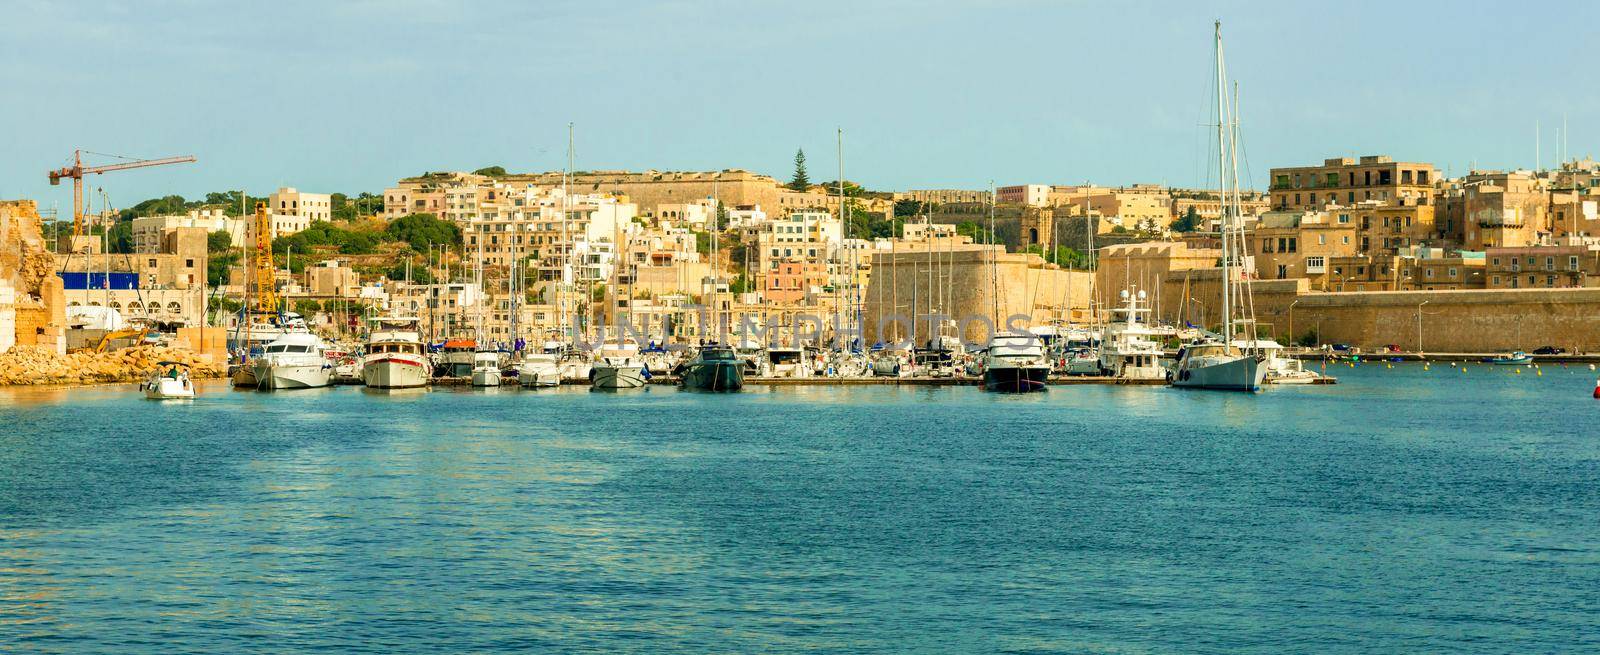 panorama of Valletta bay with boats and yachts by tan4ikk1